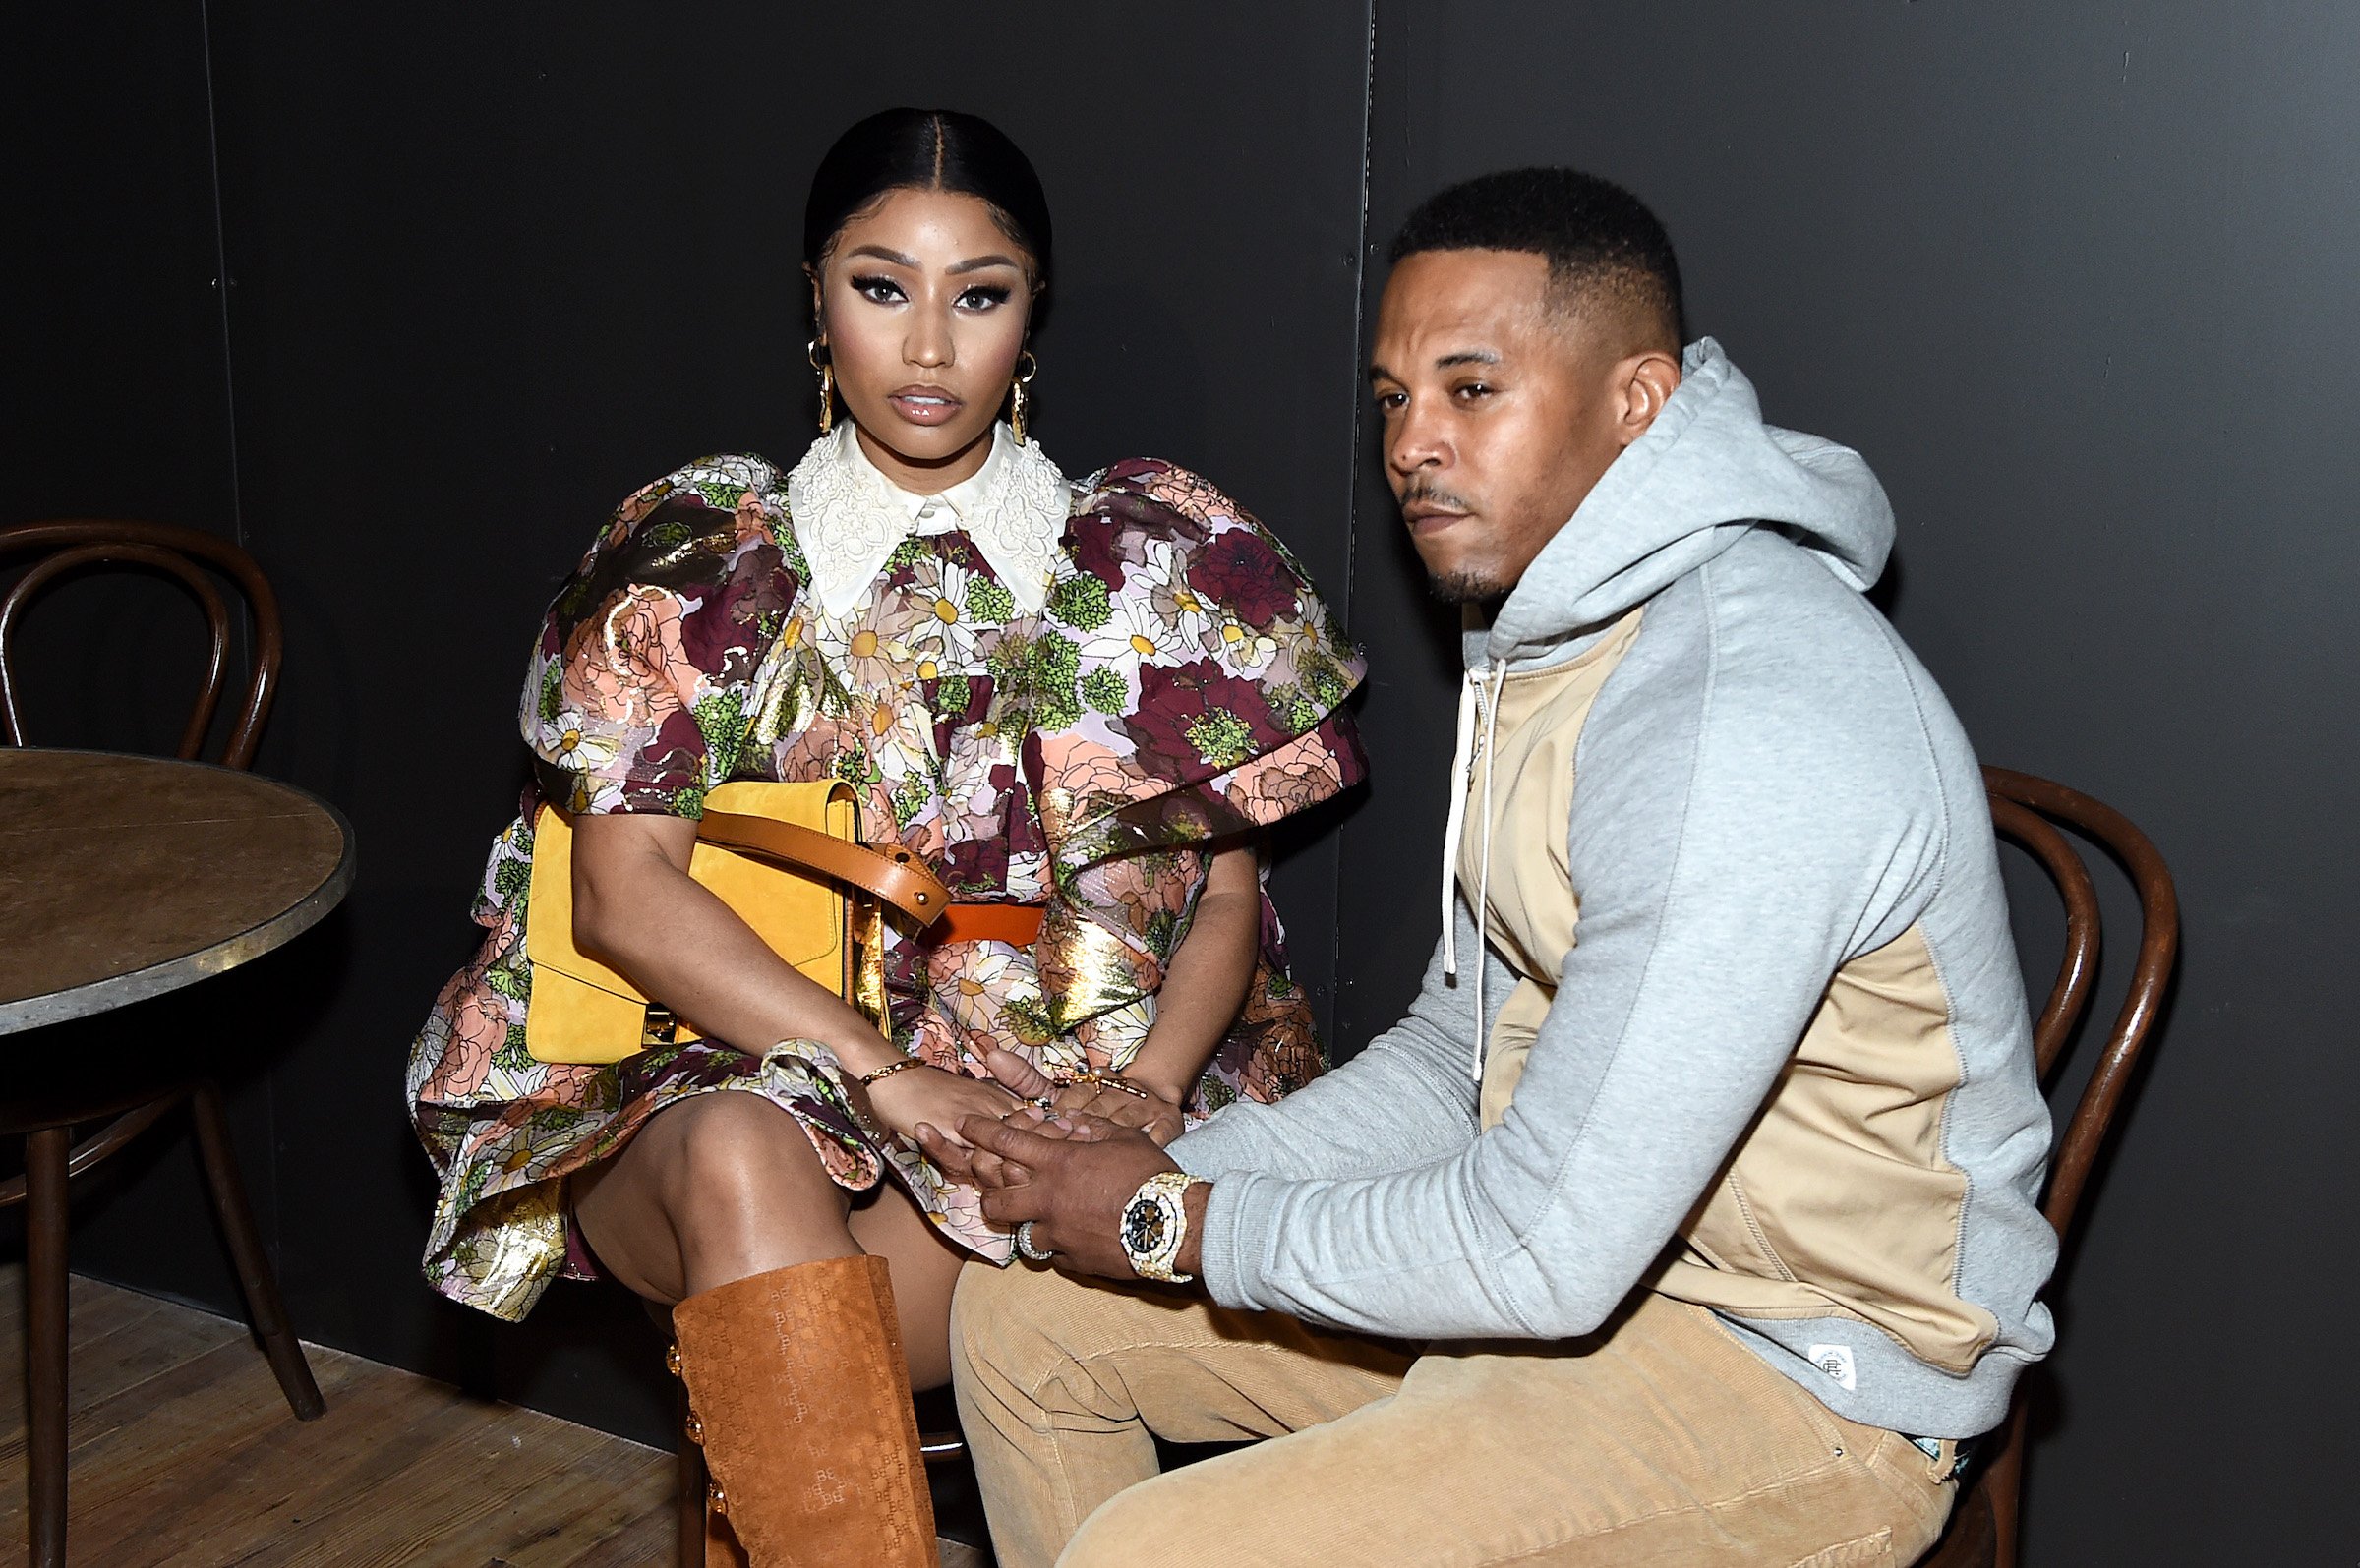 Nicki Minaj and Kenneth Petty attend the Marc Jacobs Fall 2020 runway show during New York Fashion Week